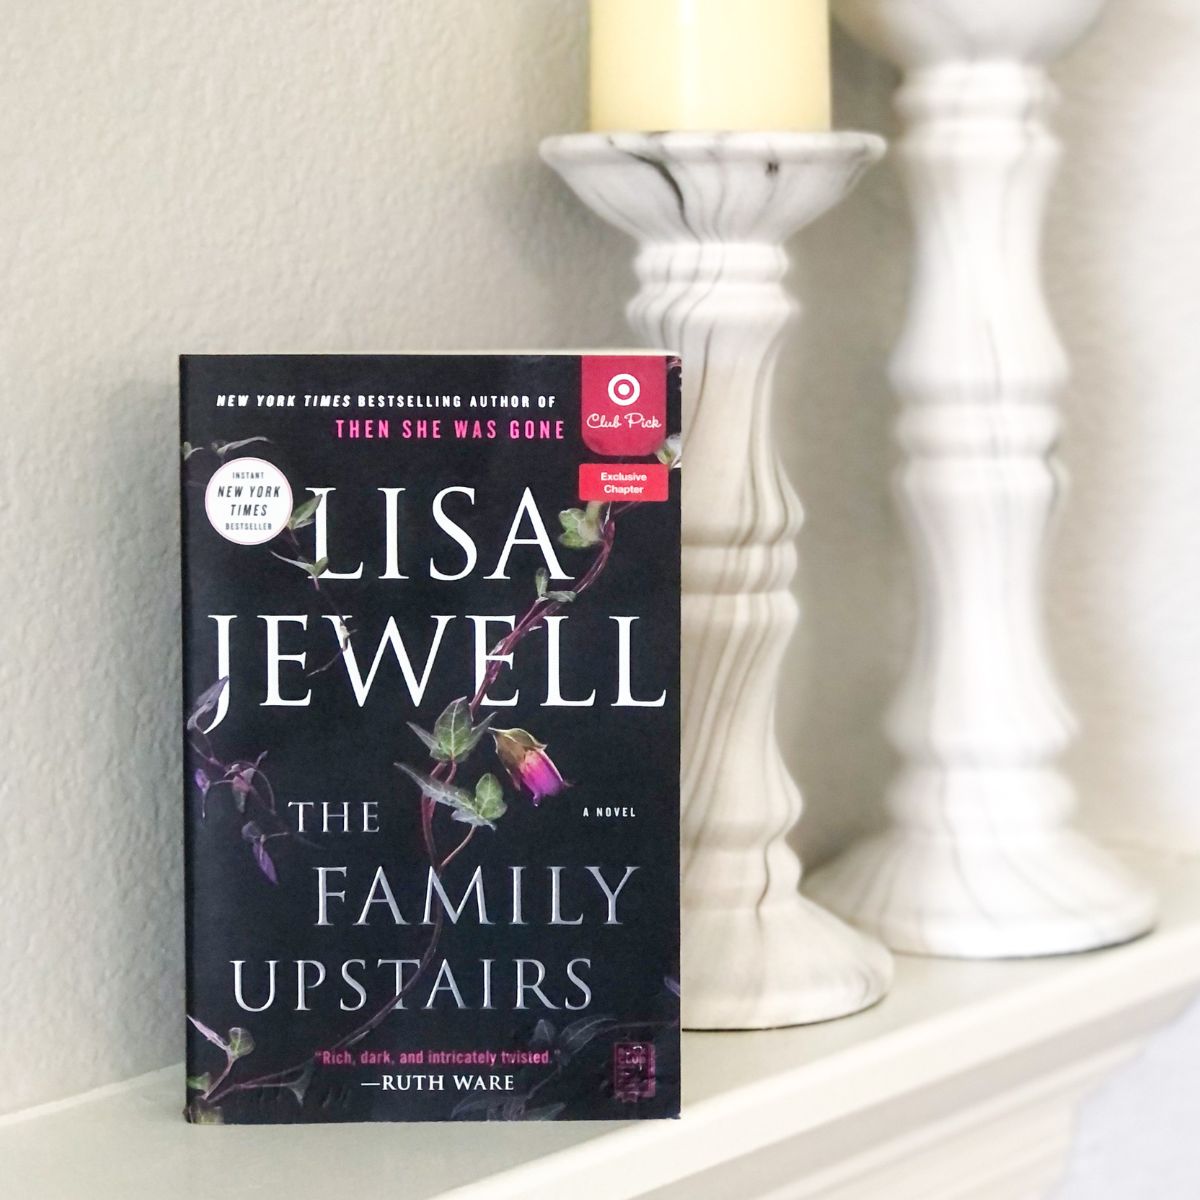 The Family Upstairs book by Lisa Jewell sitting on a fireplace mantel with white candle sticks behind it